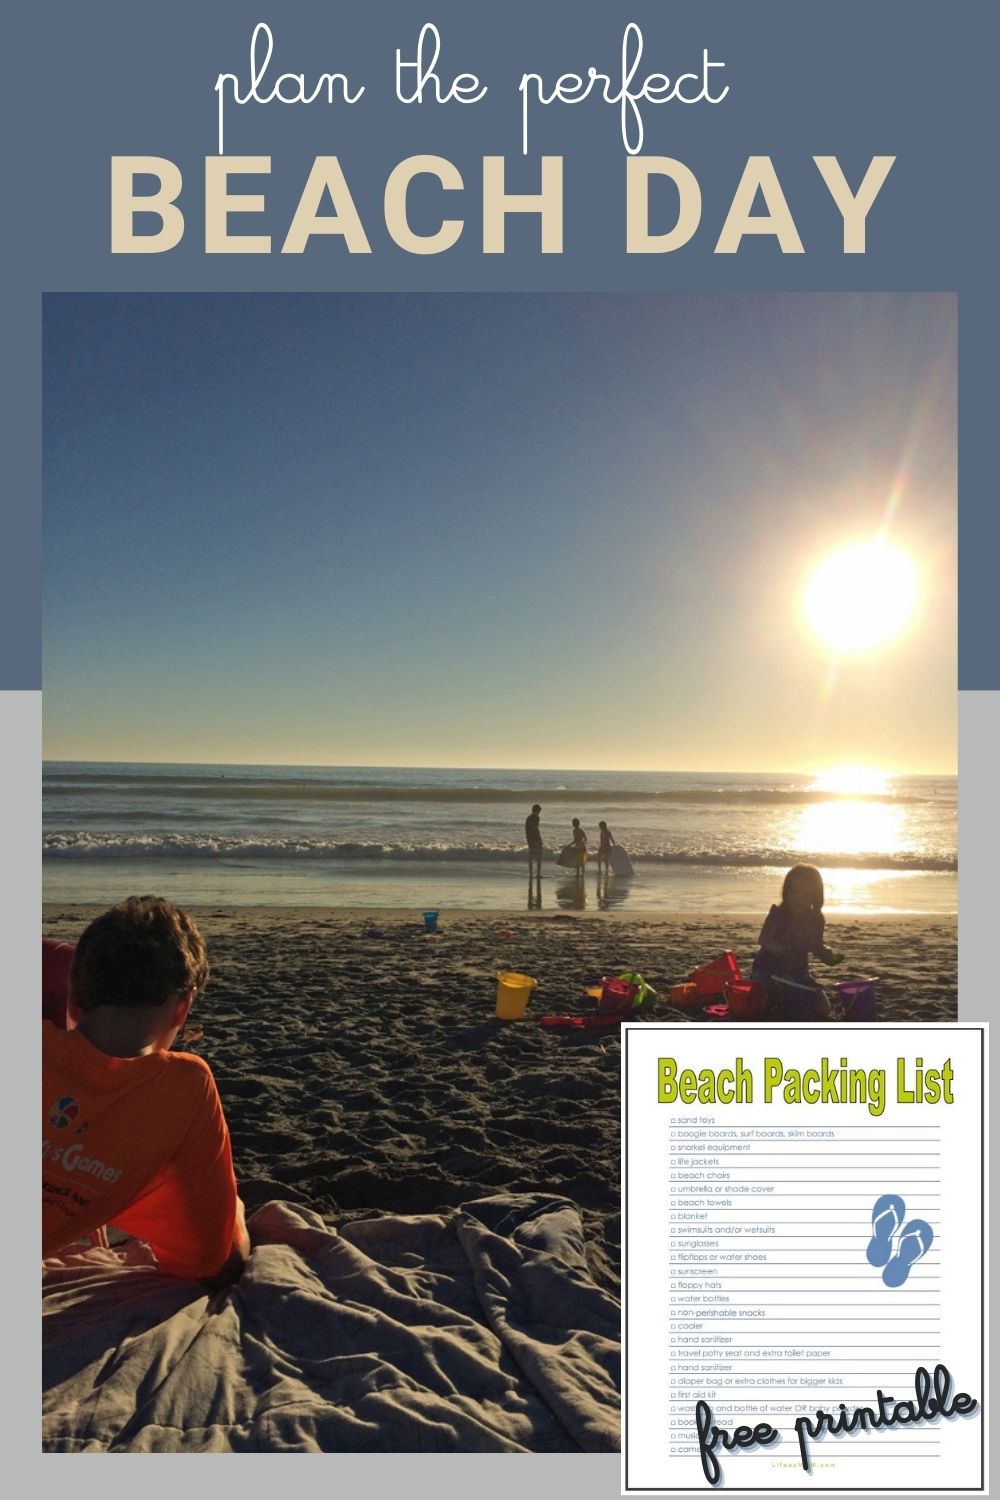 kids on the beach at sunset, with text overlay and free packing list printable overlay.